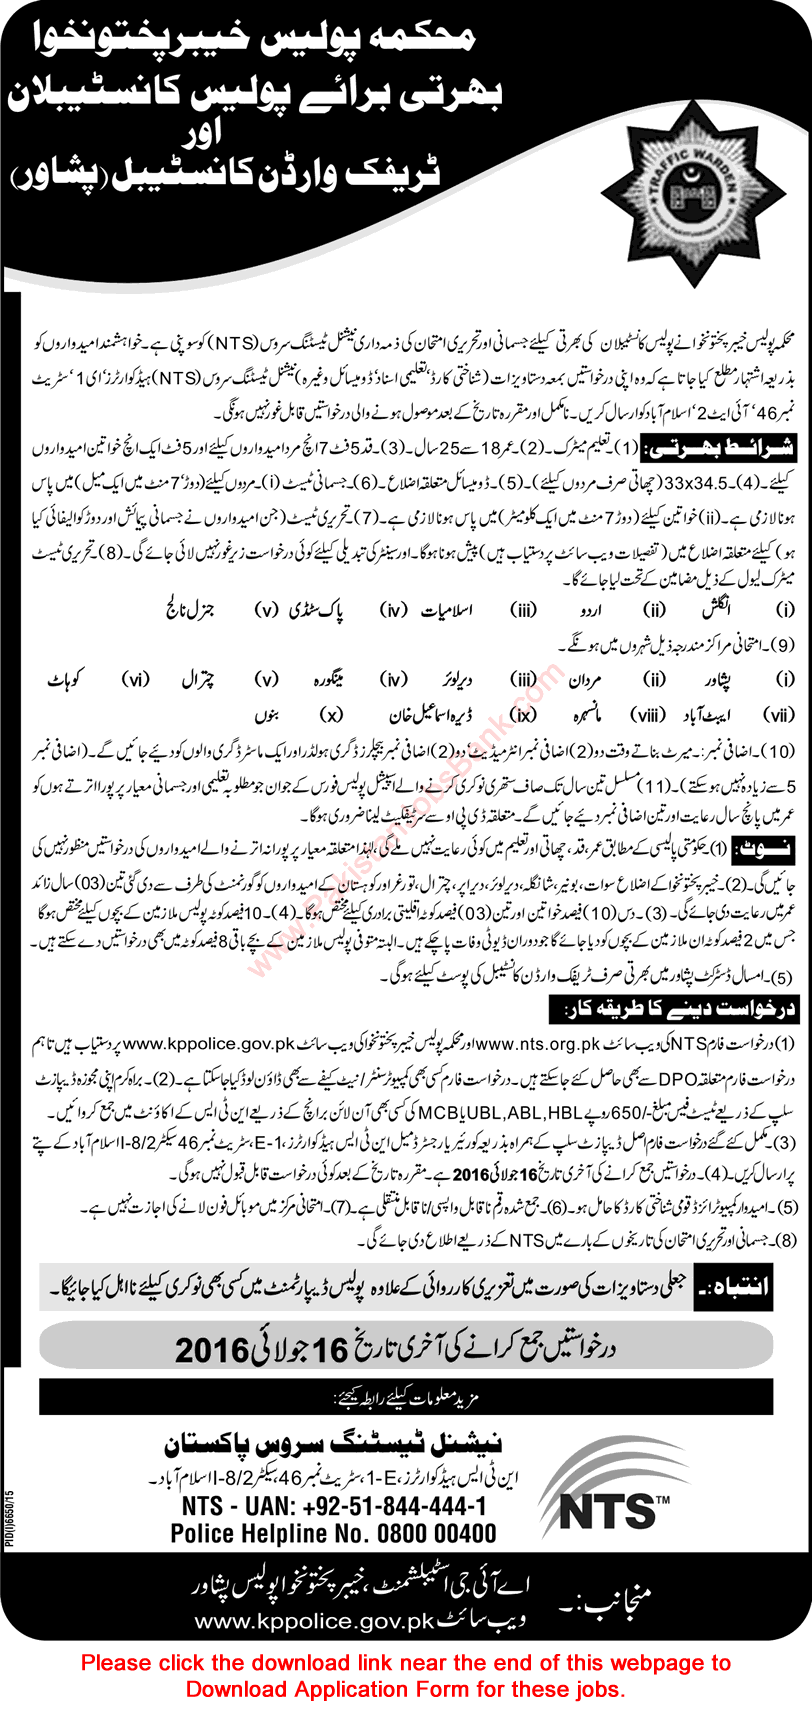 KPK Police Jobs July 2016 Constables & Traffic Wardens NTS Application Form Download Latest / New